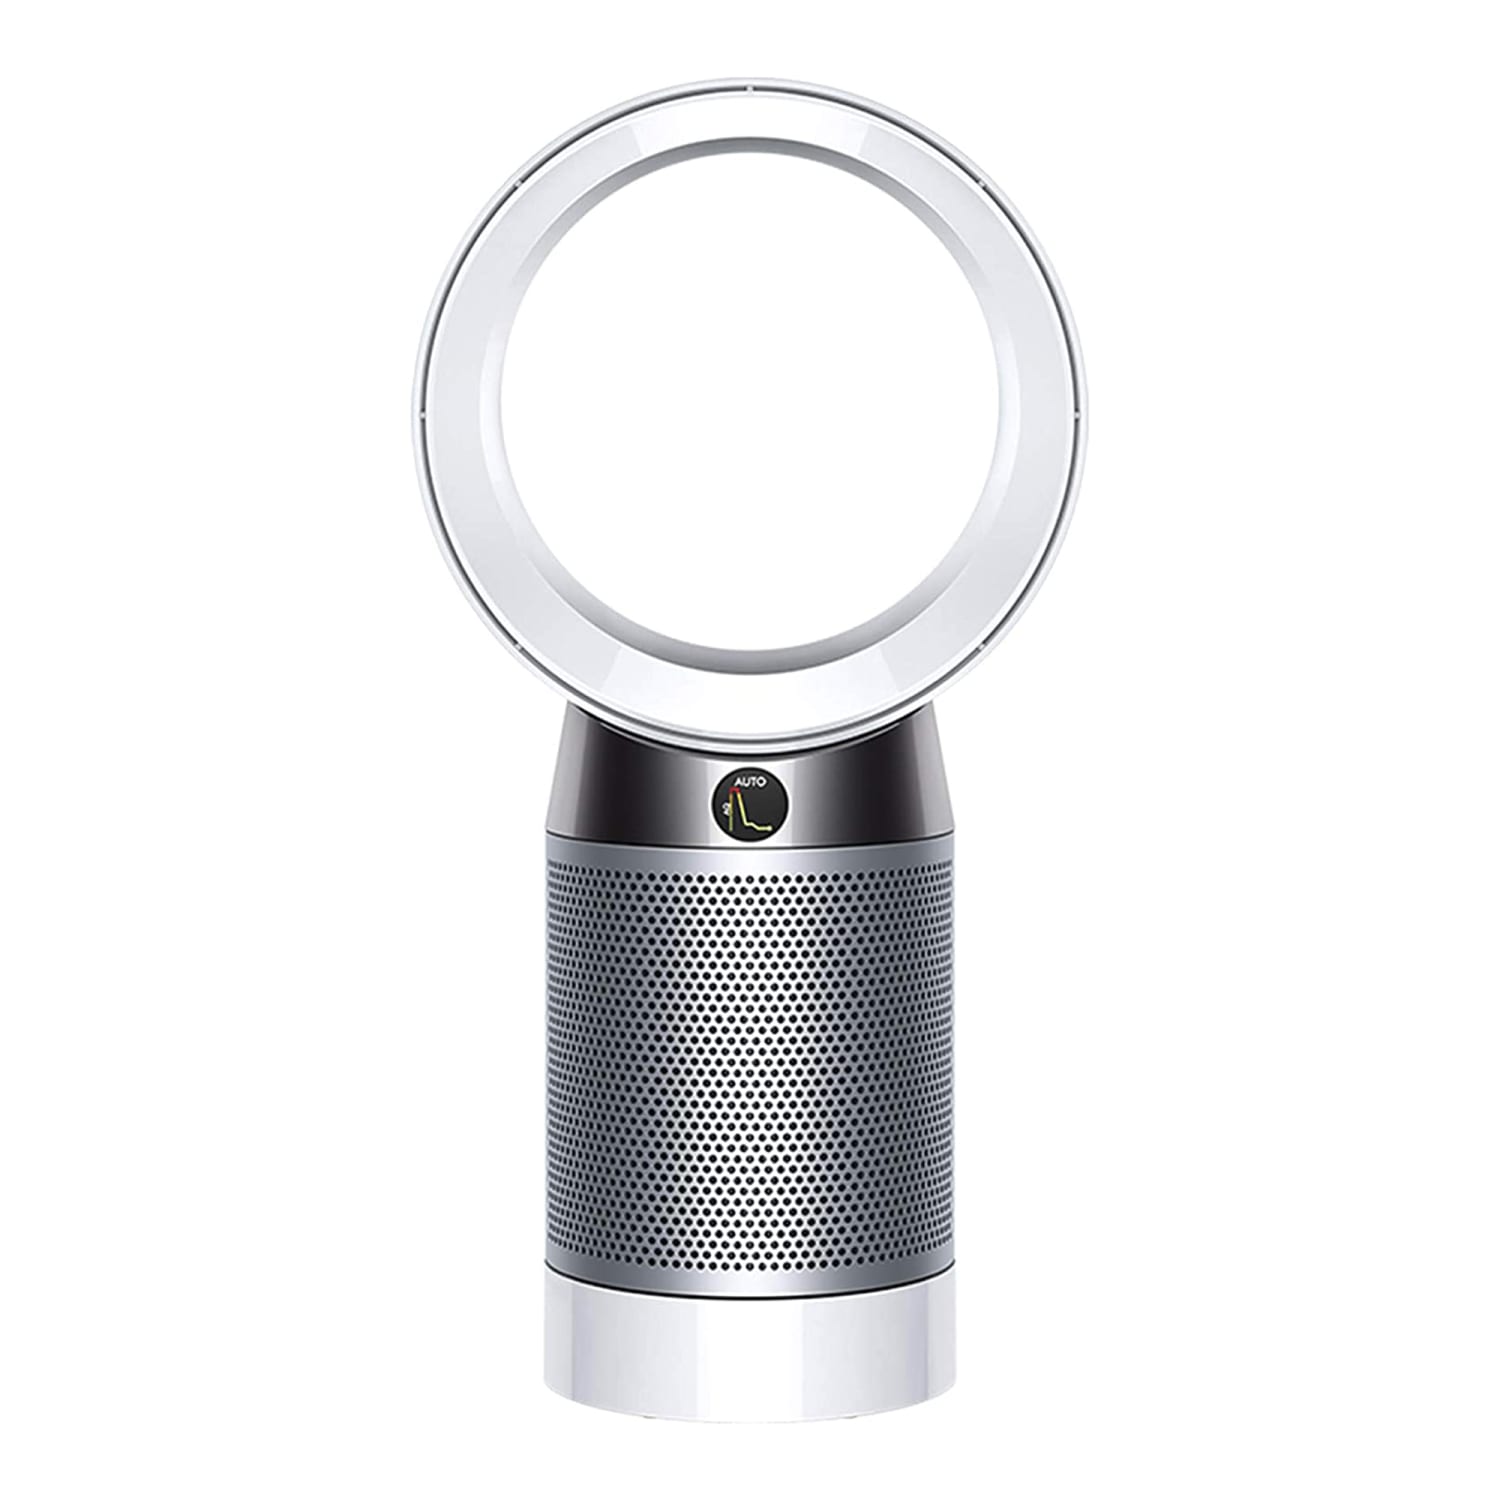 værtinde Kloster prøve Dyson air purifier recommendations and shopping guide for 2023